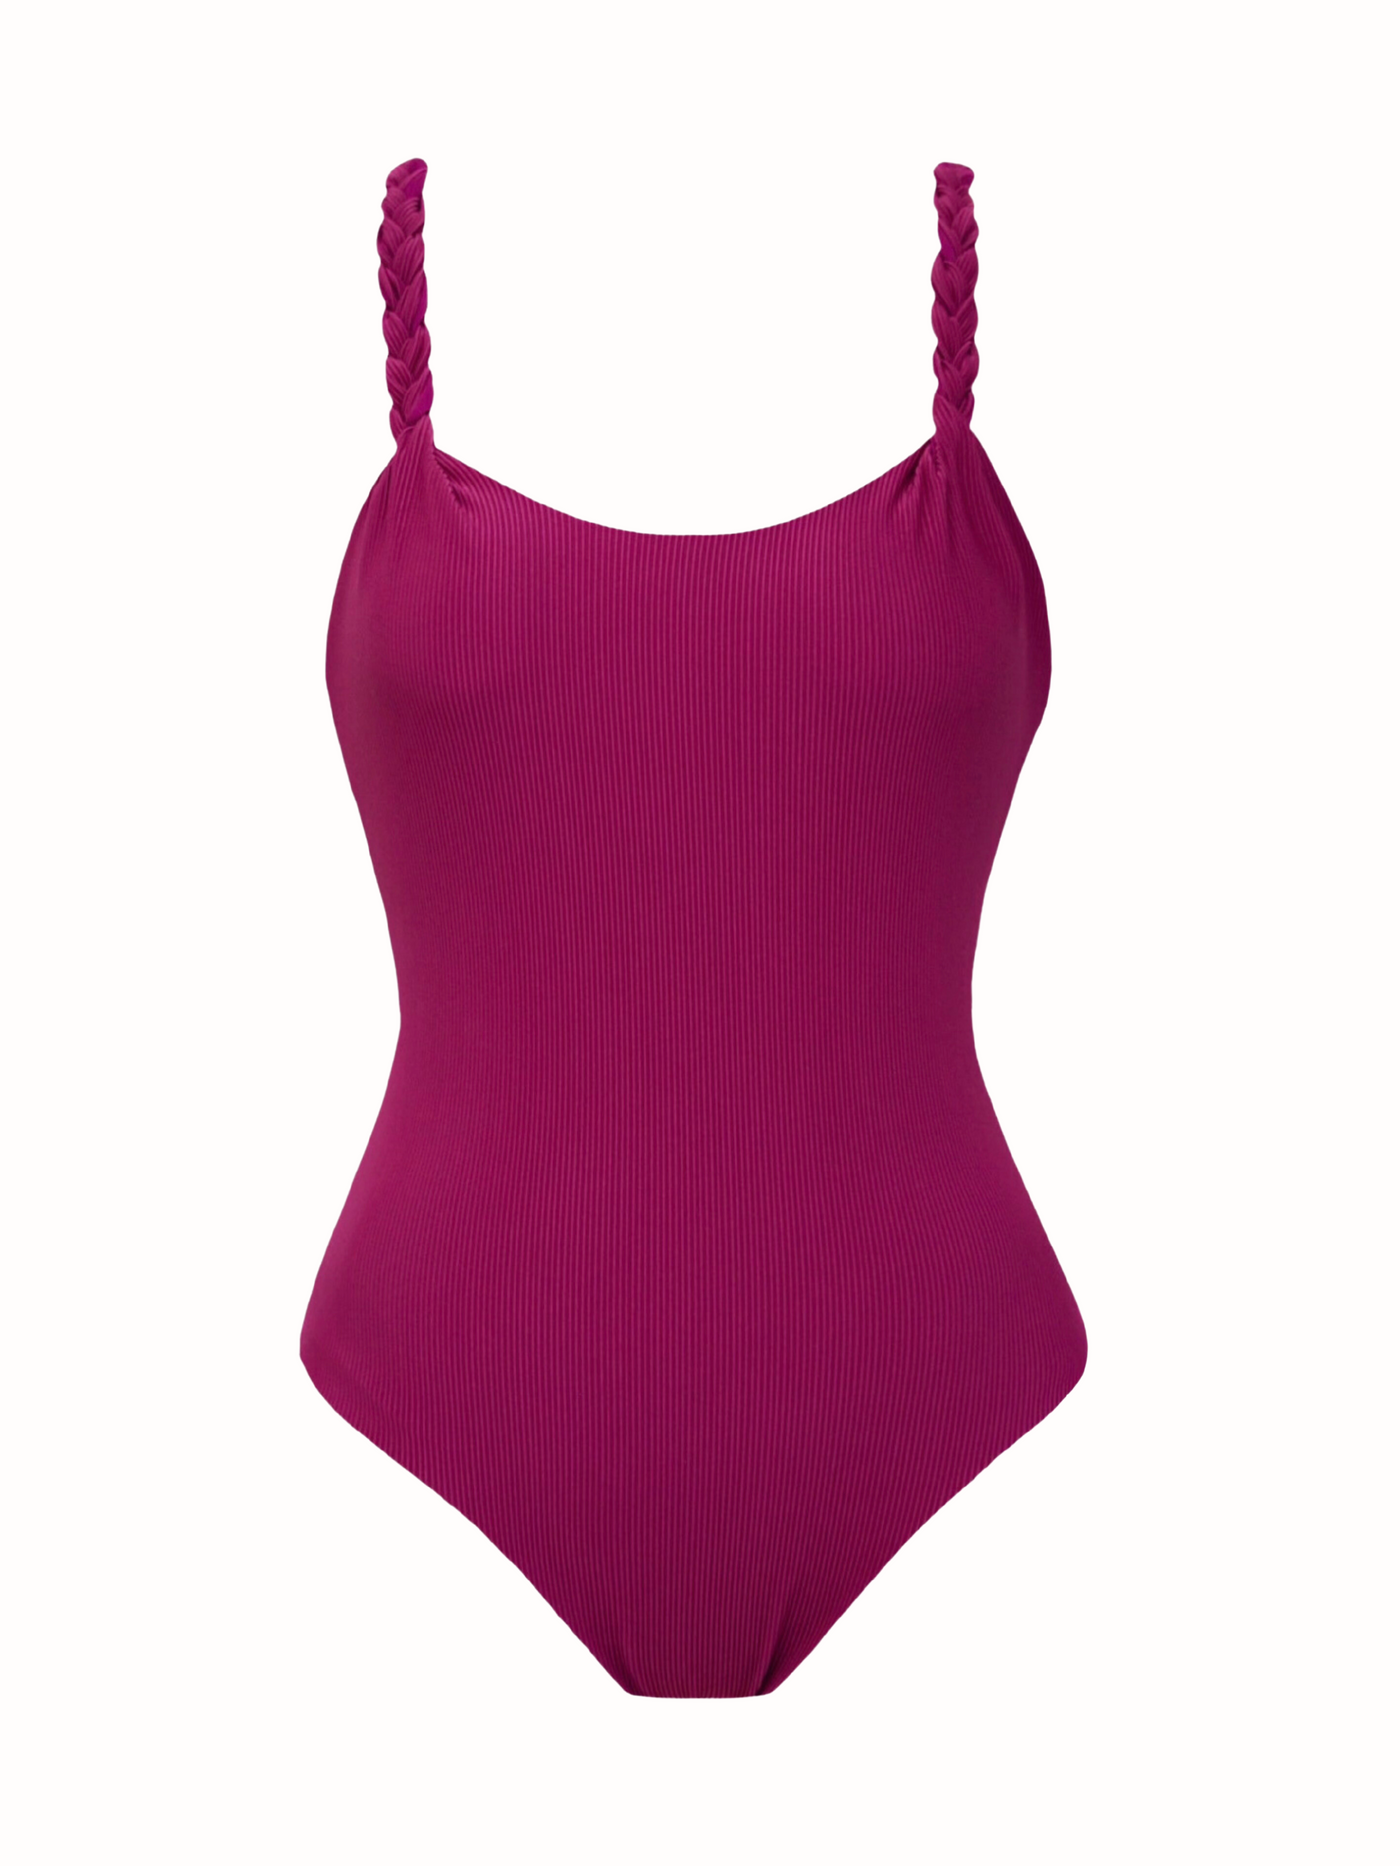 Ribbed KITTS One Piece